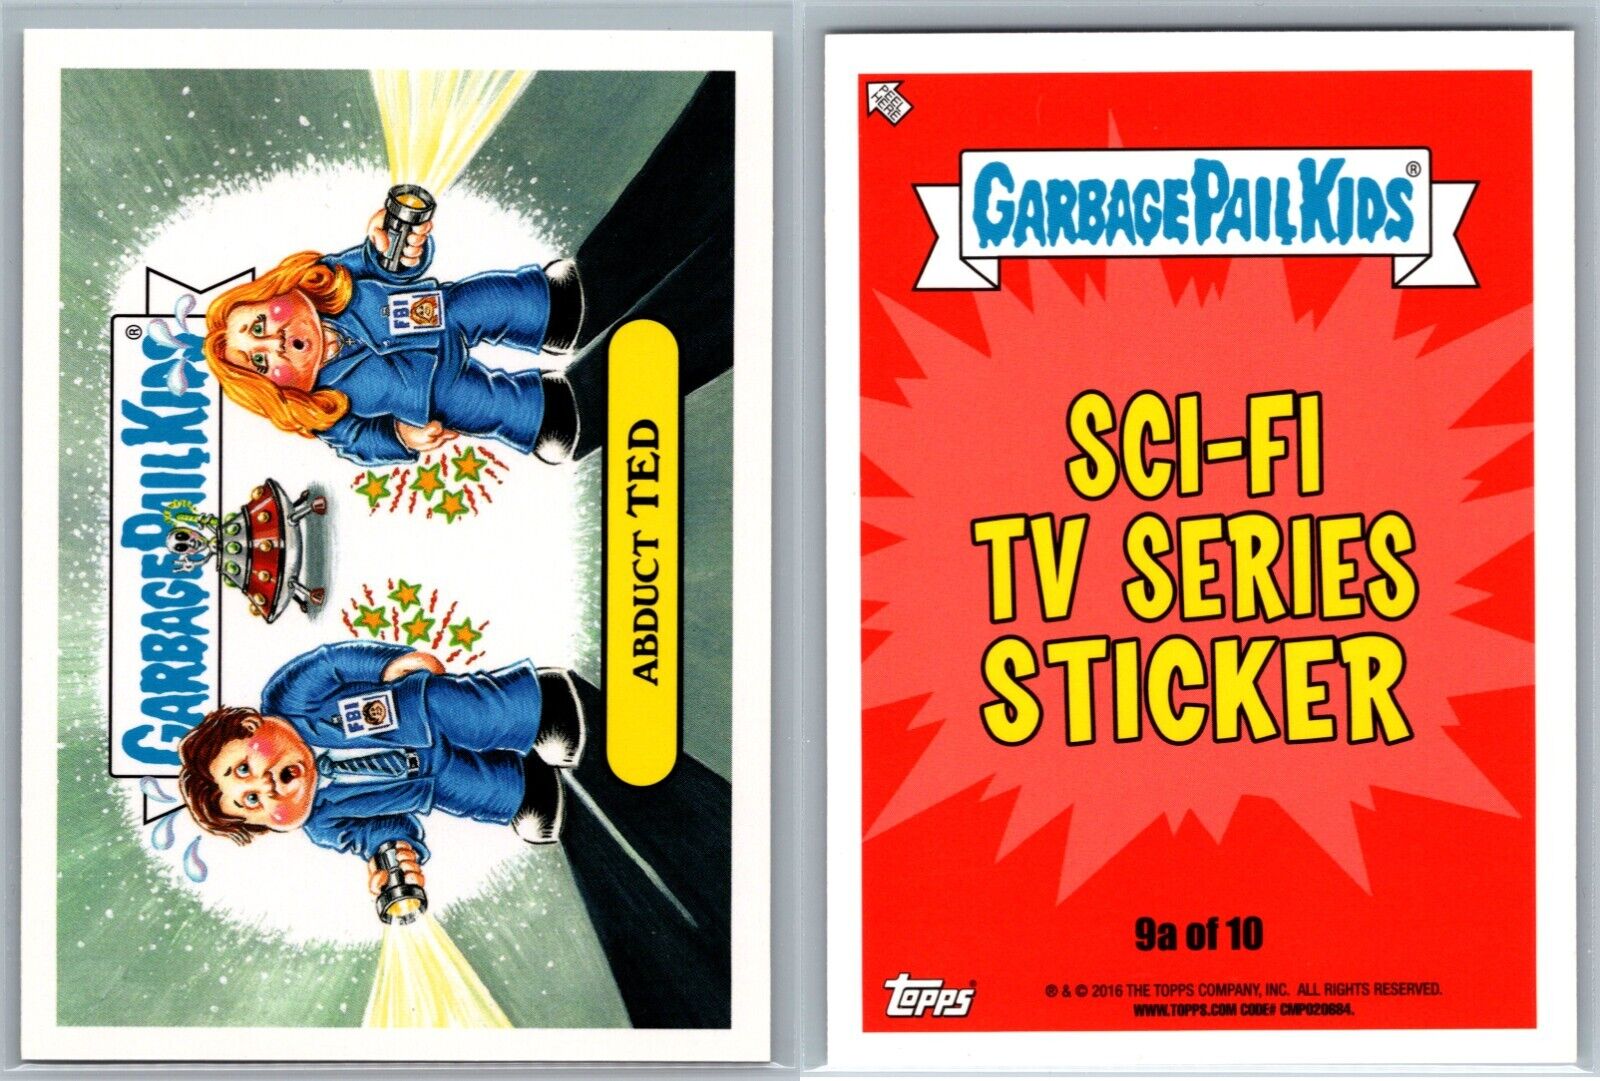 X-Files Scully & Mulder UFO Abduction Spoof Garbage Pail Kids Card Prime TV GPK